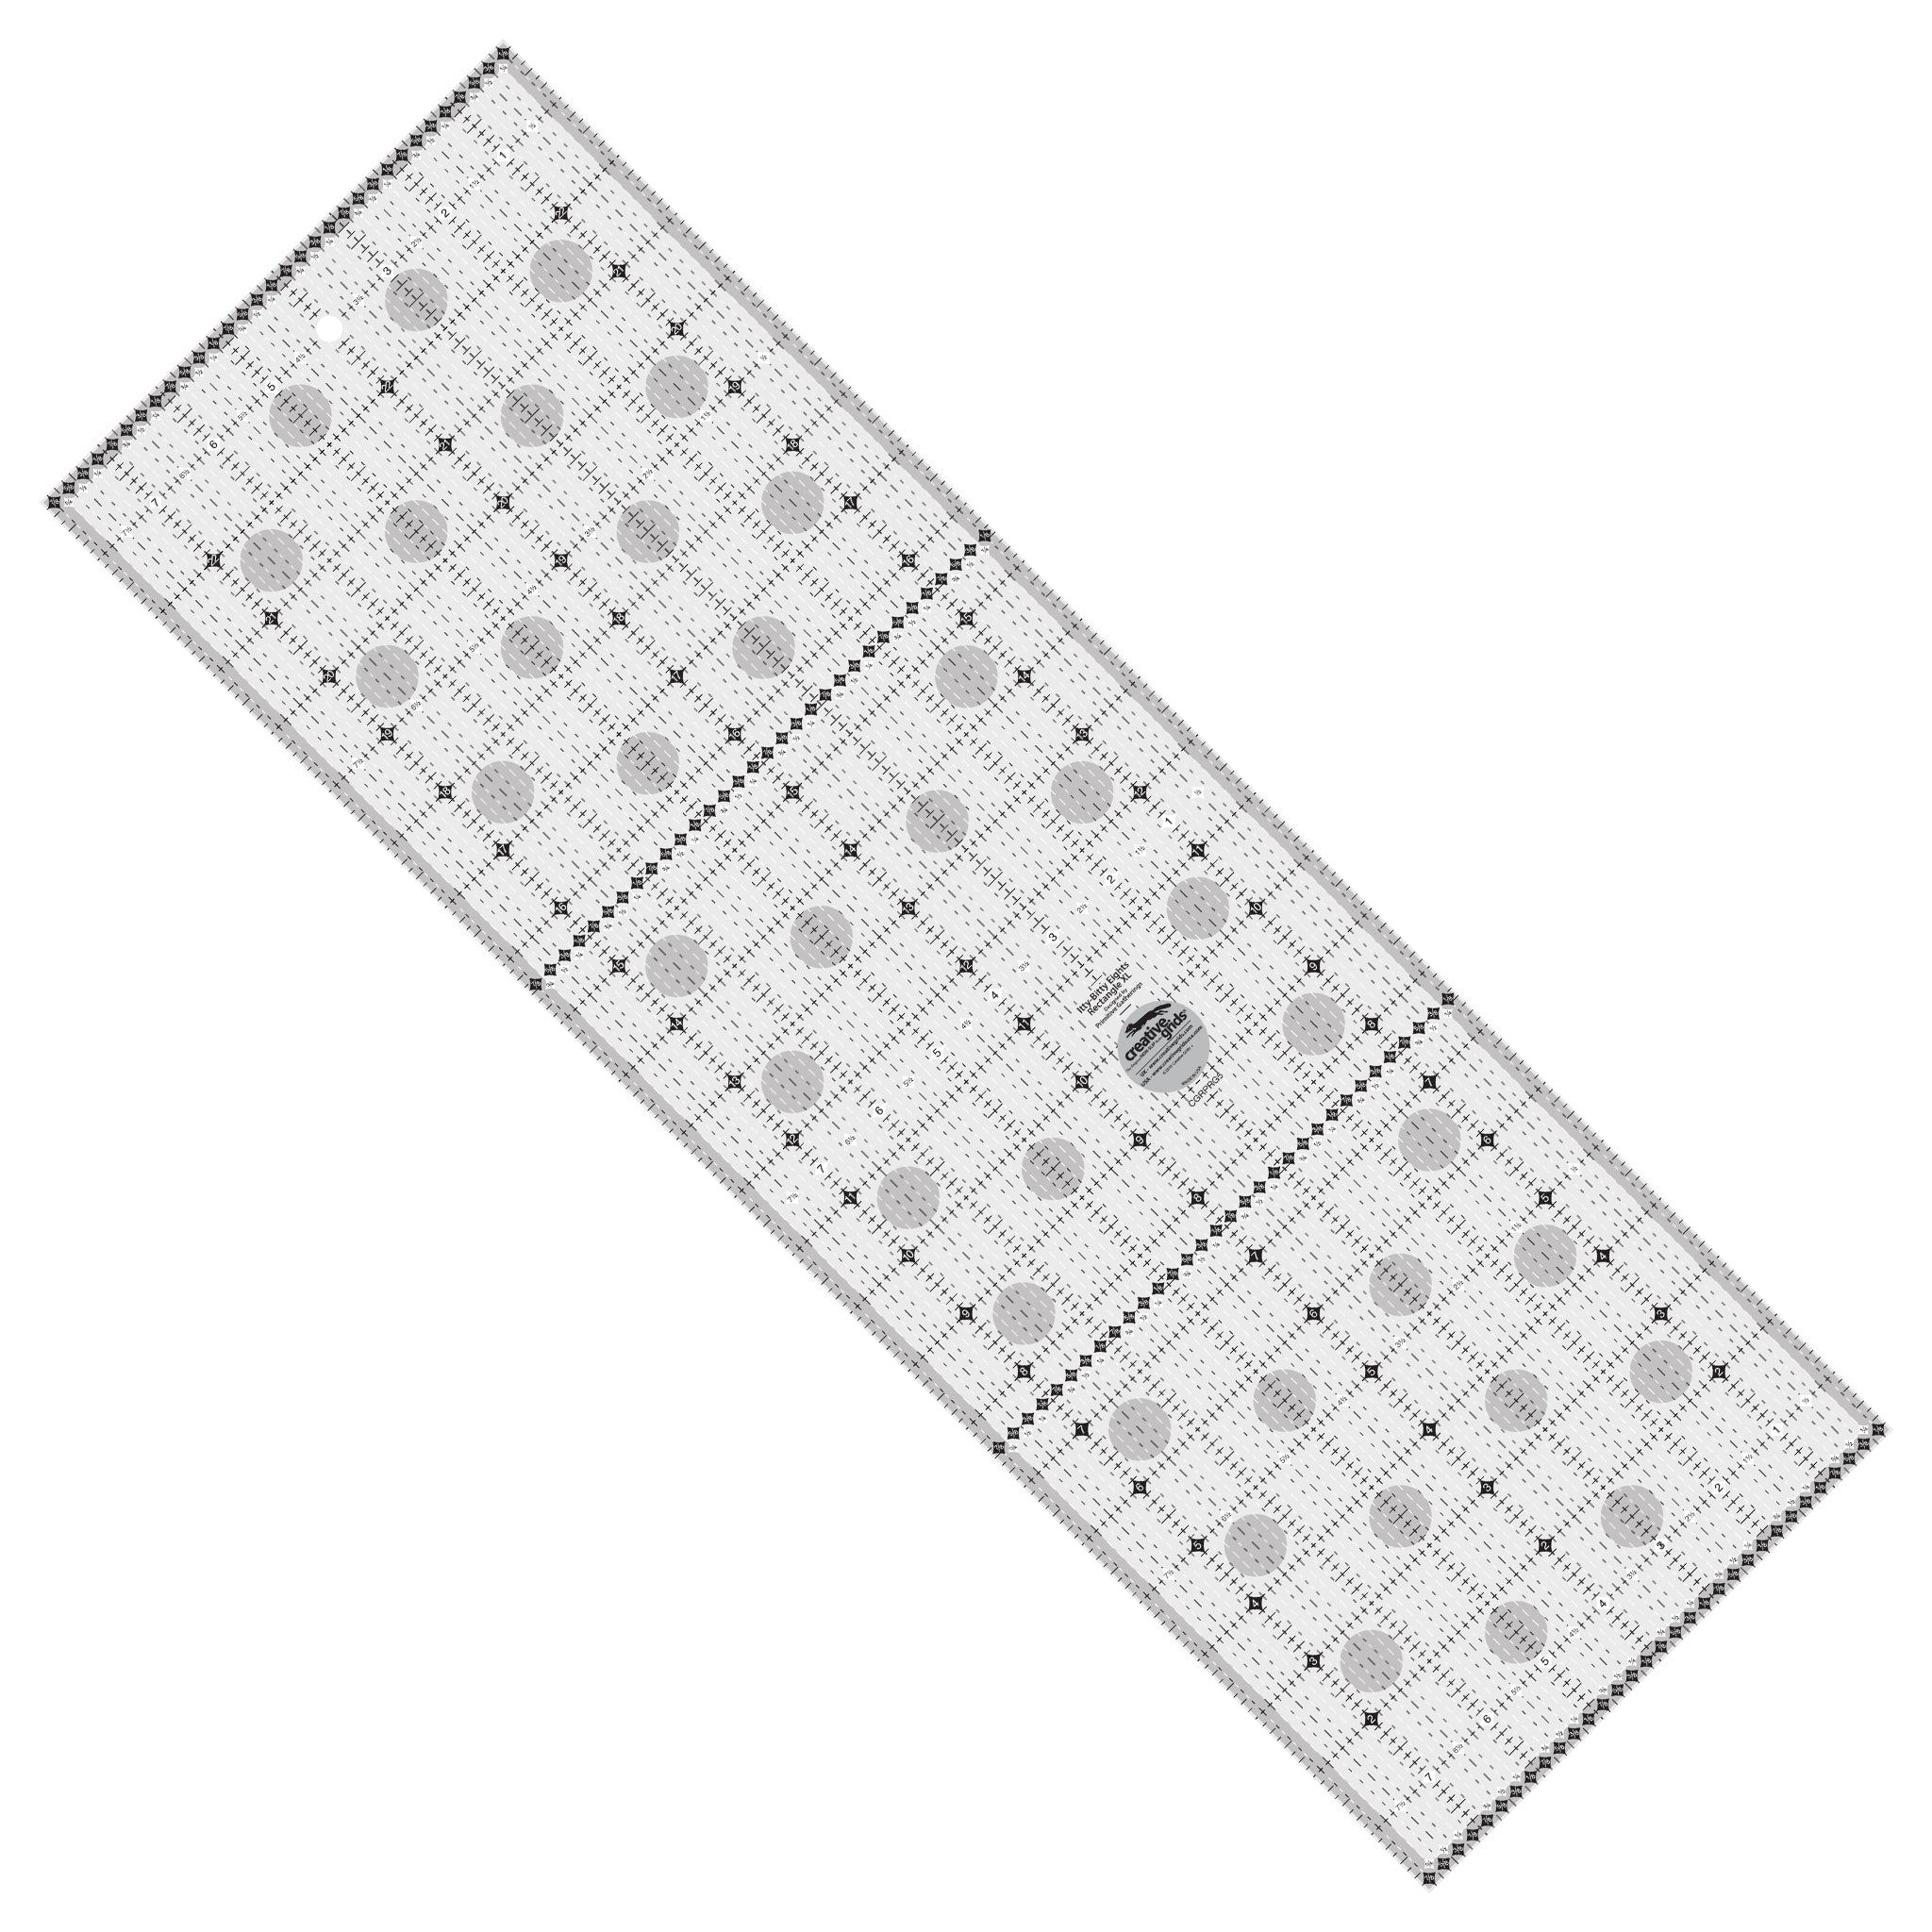 Creative Grids Itty-Bitty Eights Rectangle XL 8in x 24in Quilt Ruler (CGRPRG5)